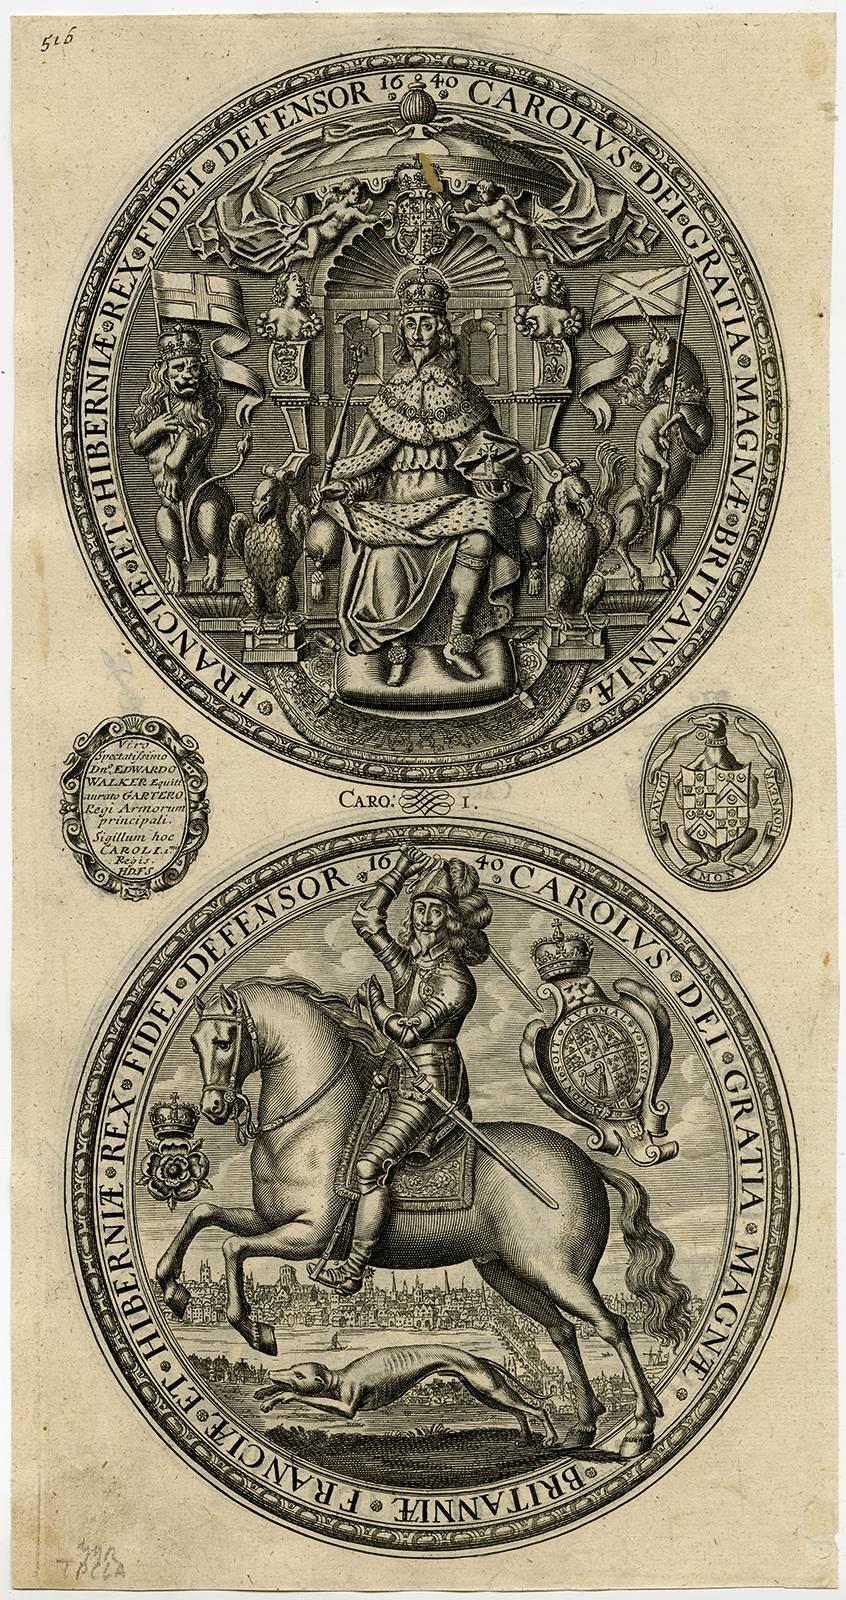 Engraving on laid paper. 
Watermark: coat of arms.

From 